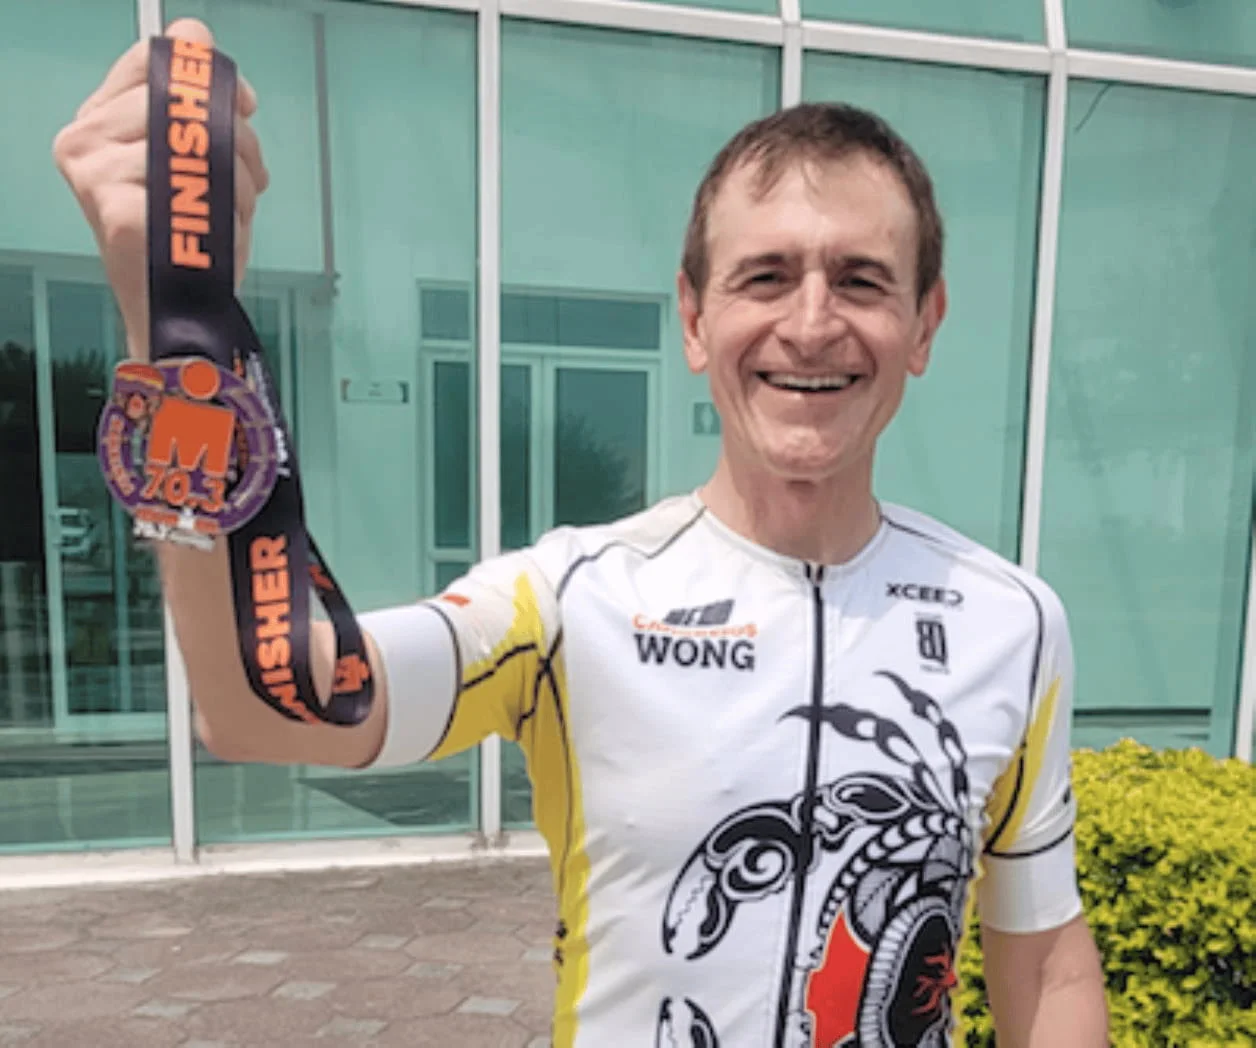 A smiling person in a cycling jersey holding up a 'Finisher' medal outside a building with glass doors.